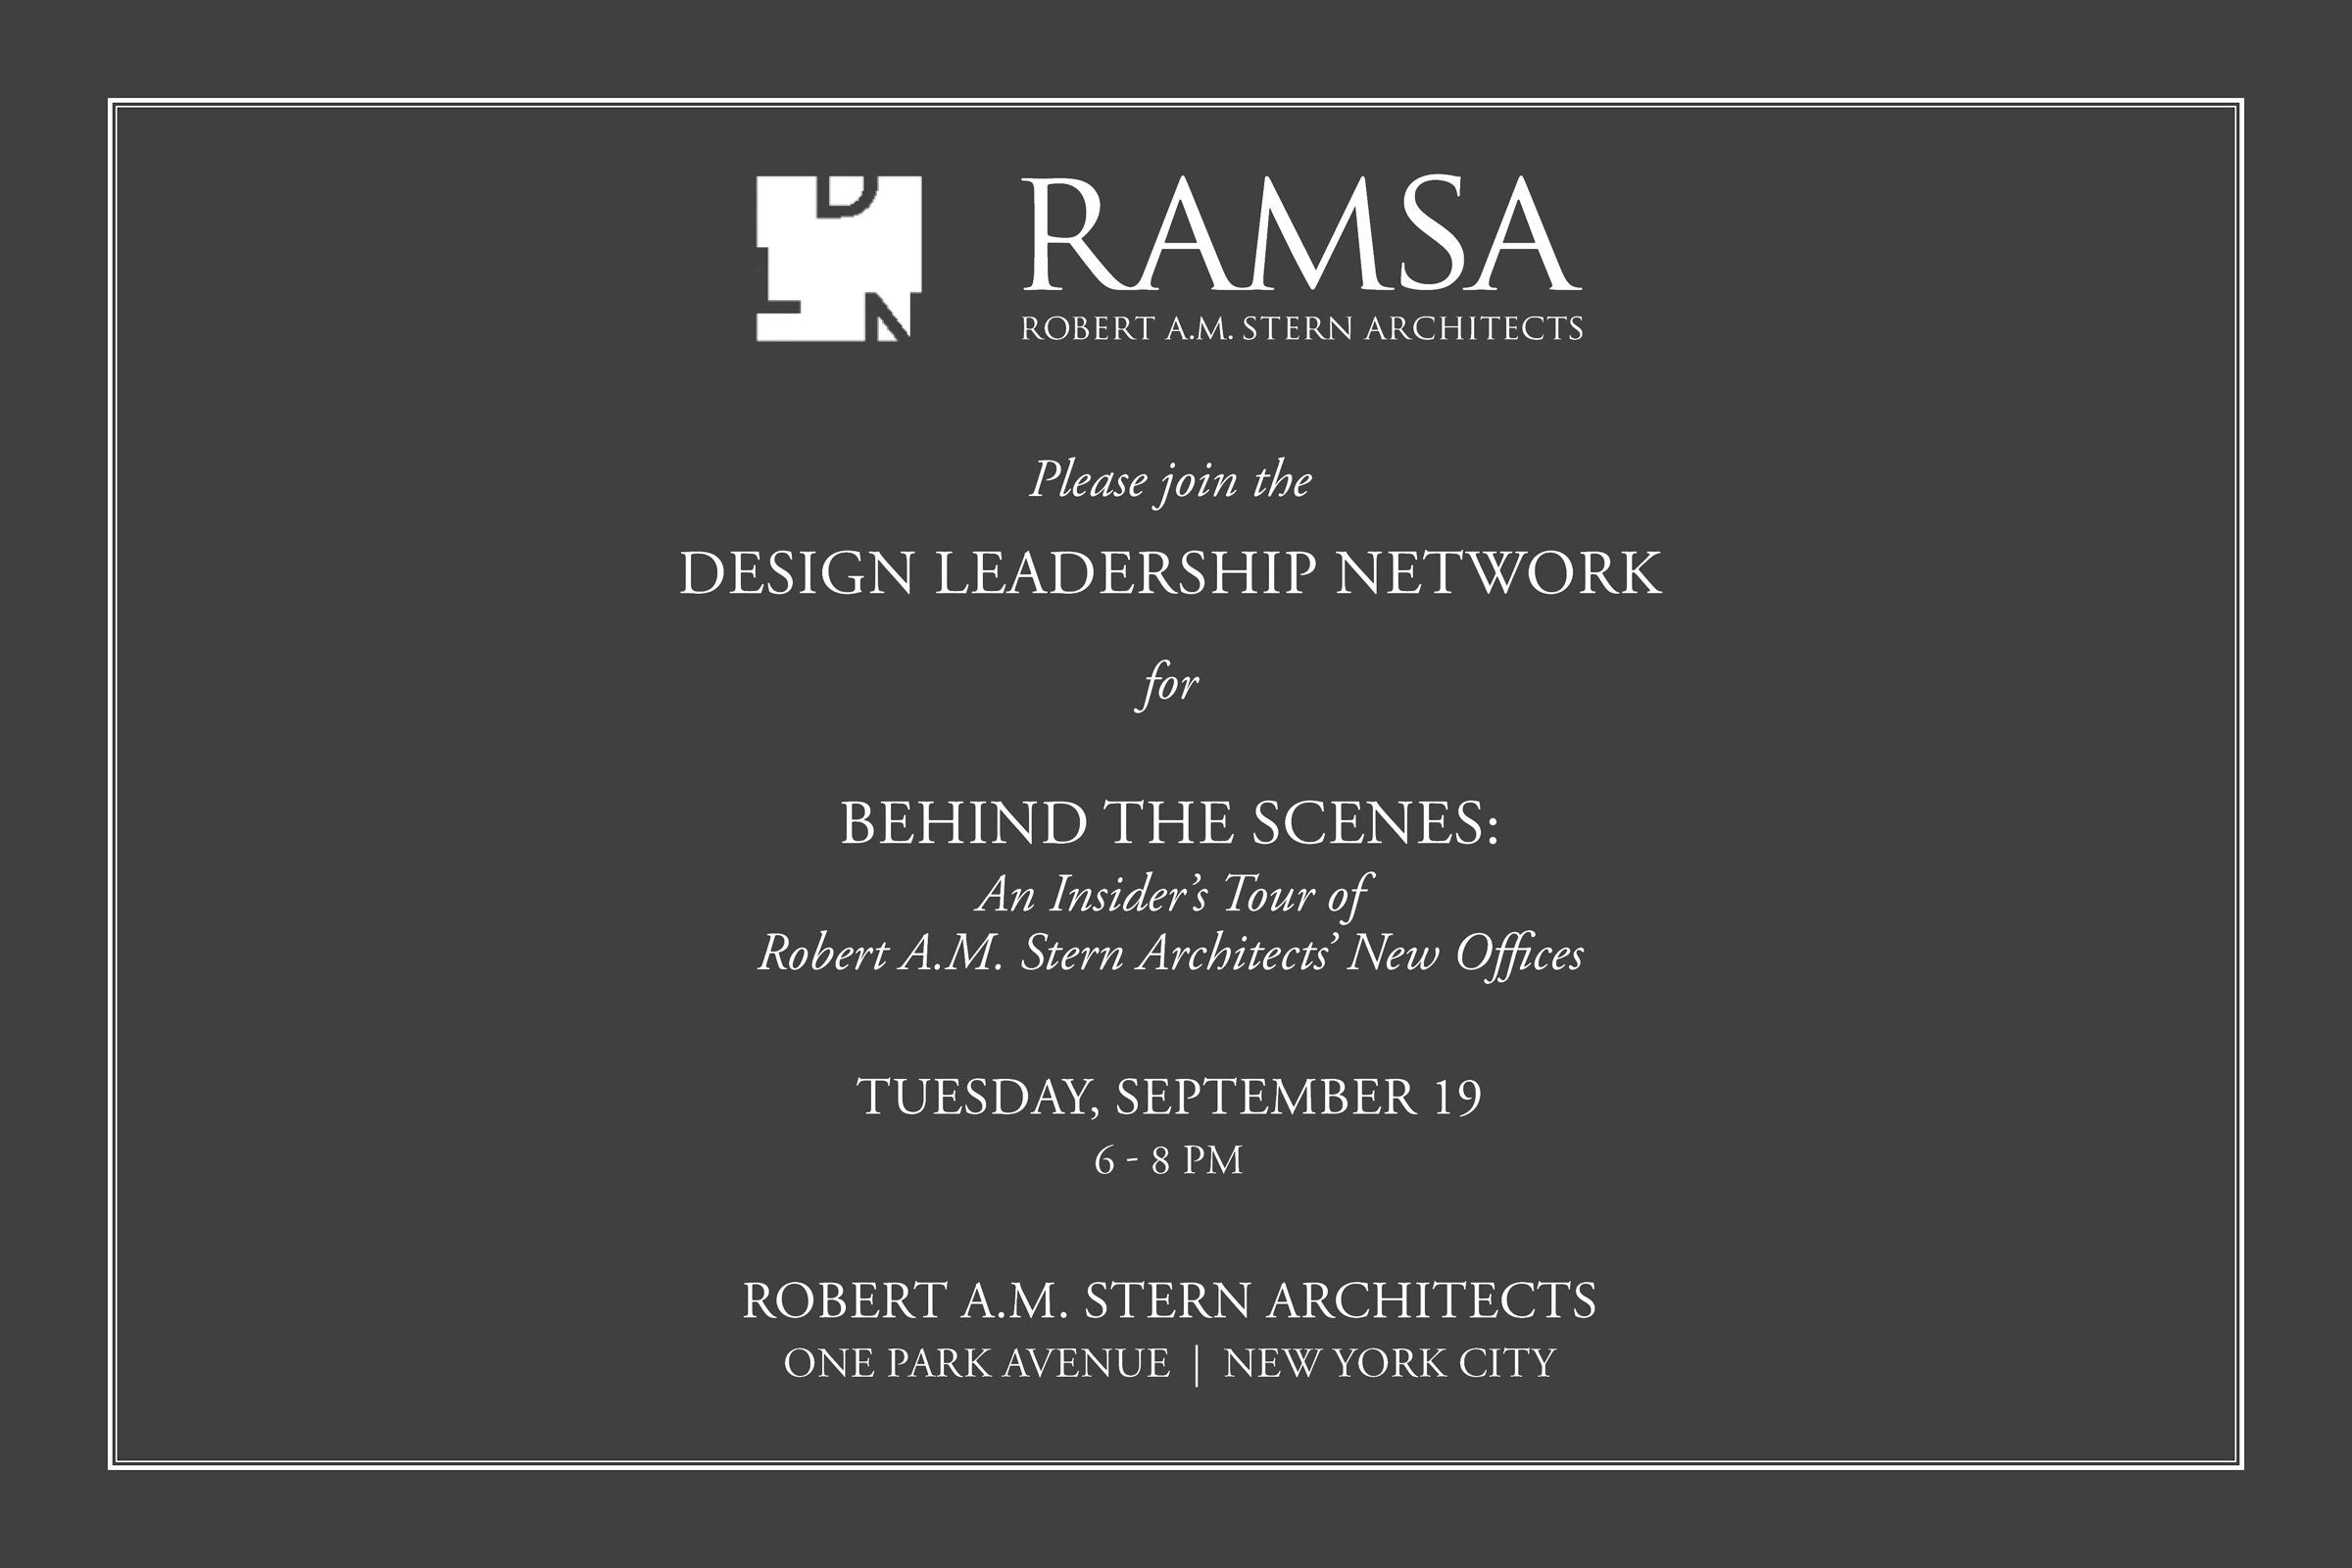 Robert A.M. Stern Architects Hosts Design Leadership Network Reception "Behind the Scenes"